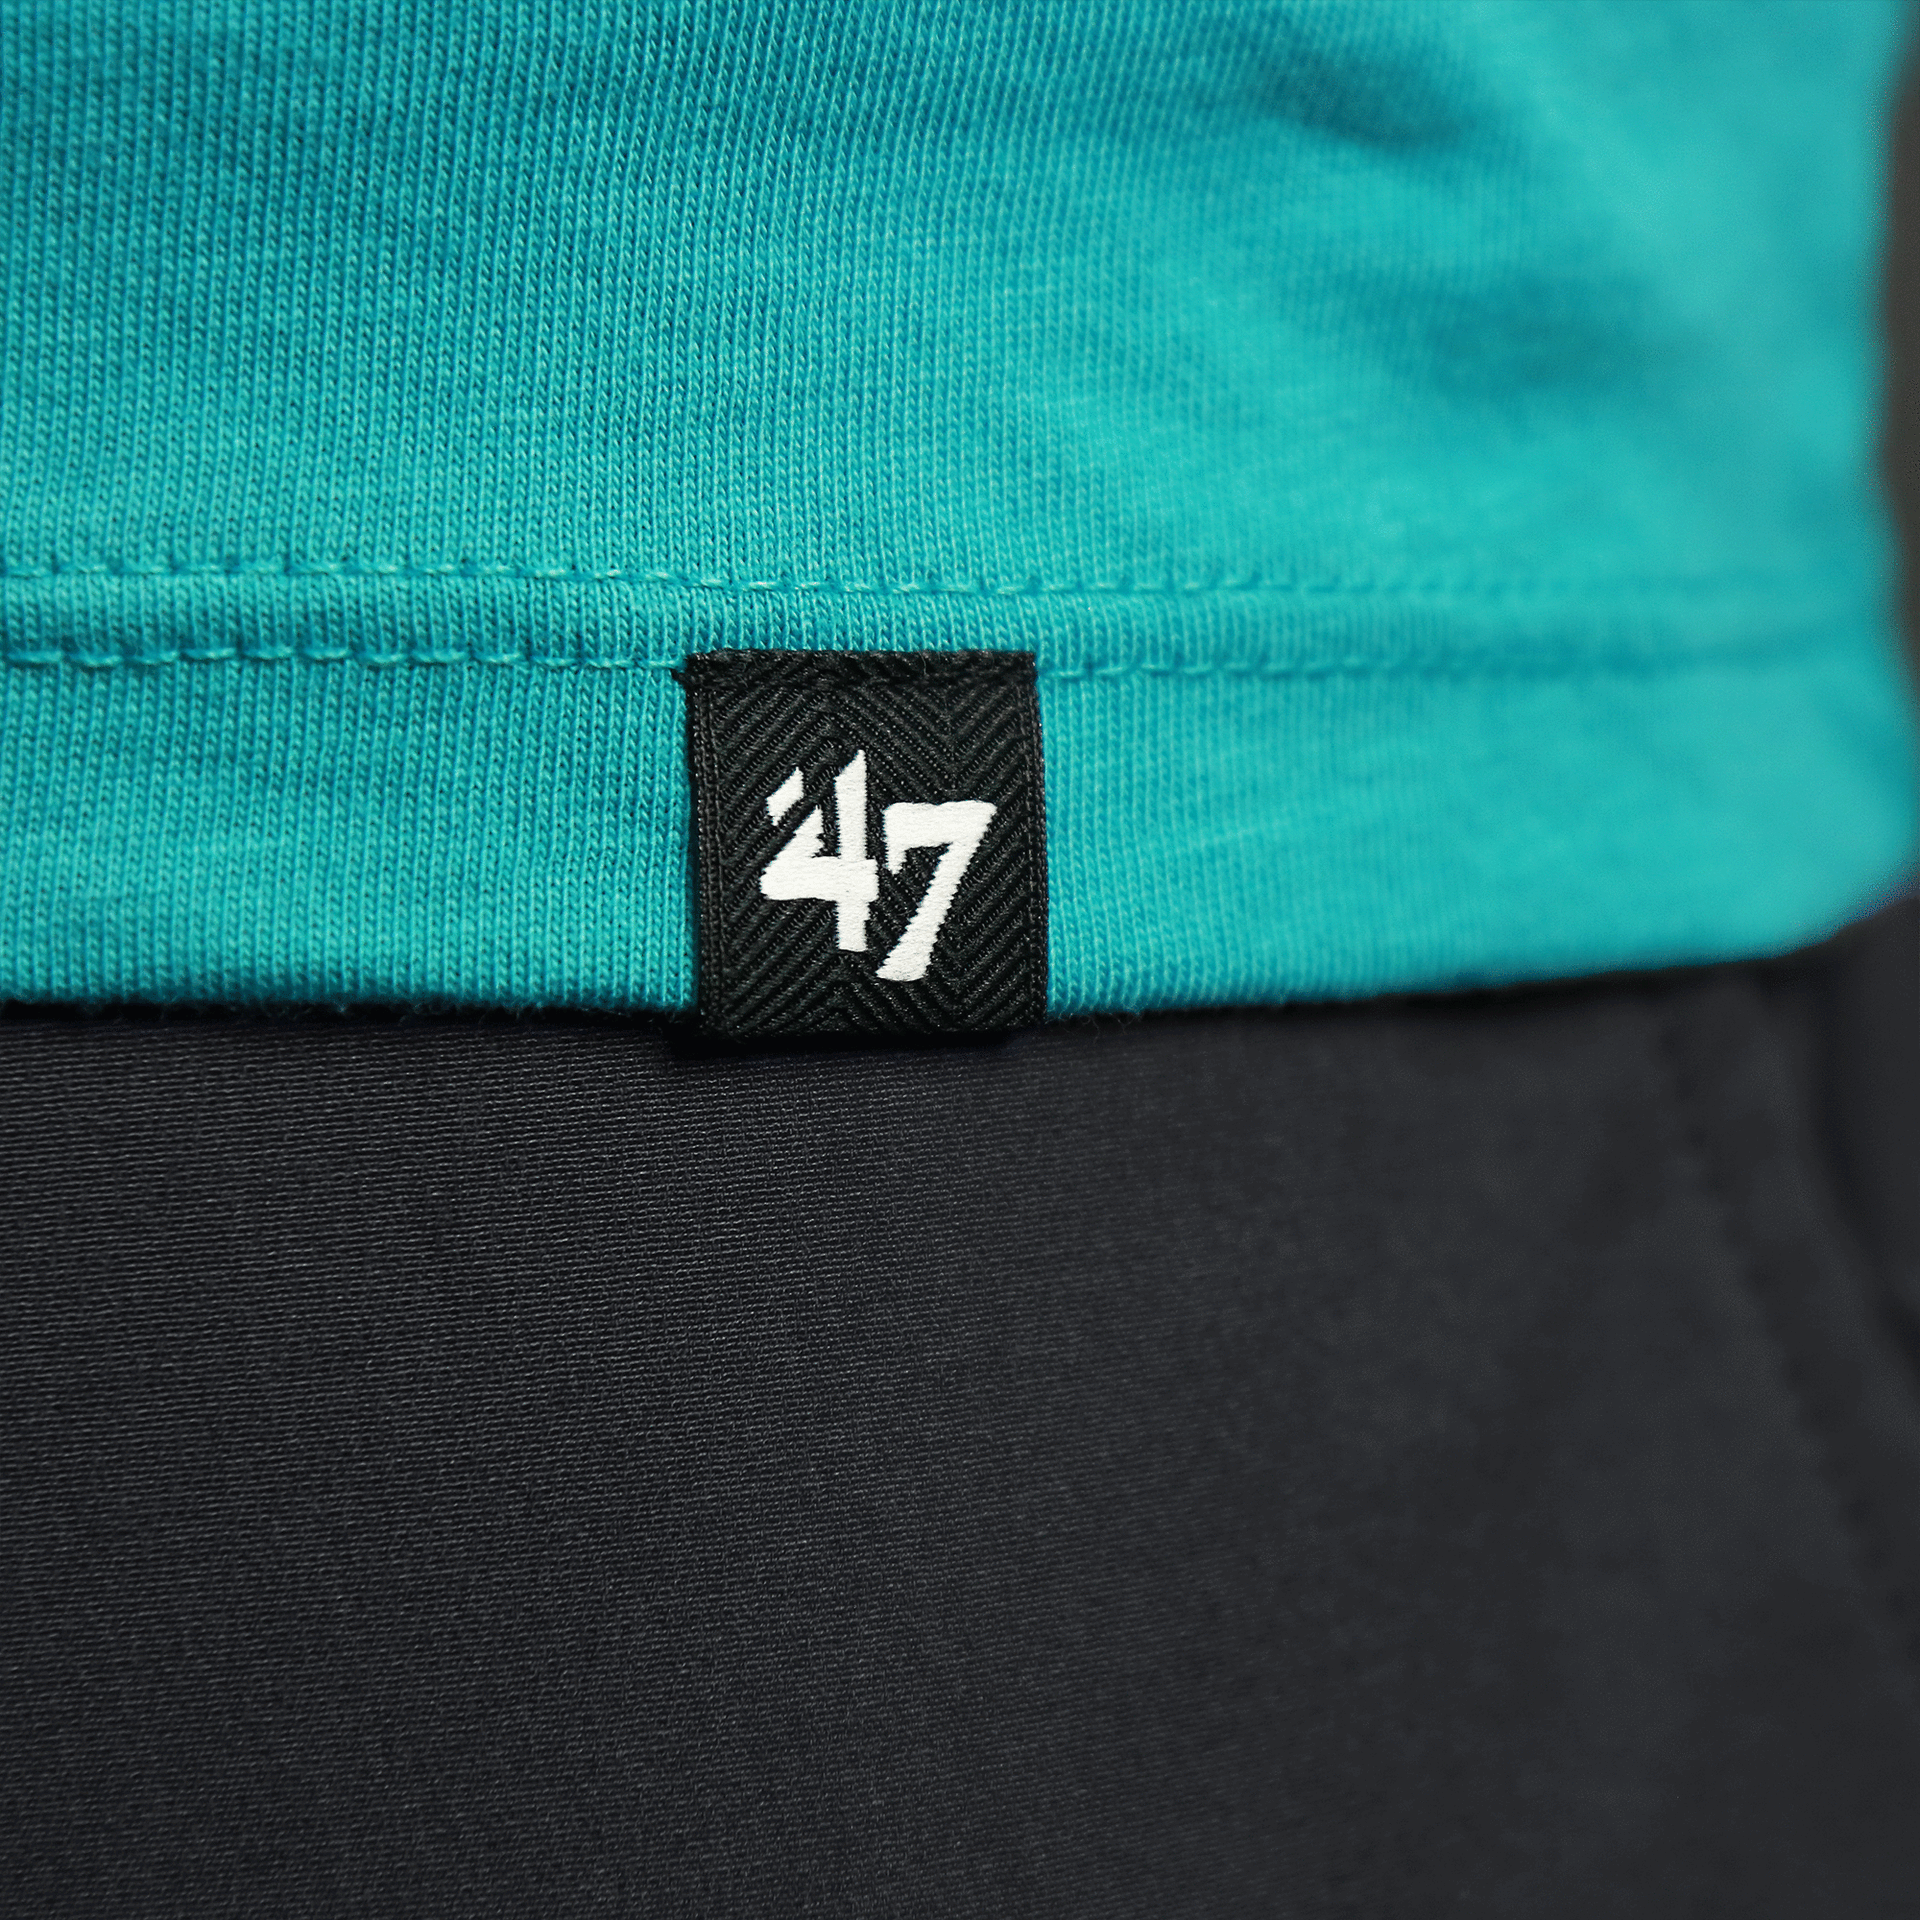 The 47 Brand Tag on the Throwback Miami Dolphins Worn Printed 1974 Dolphins Logo Tshirt | Oceanic Teal Tshirt